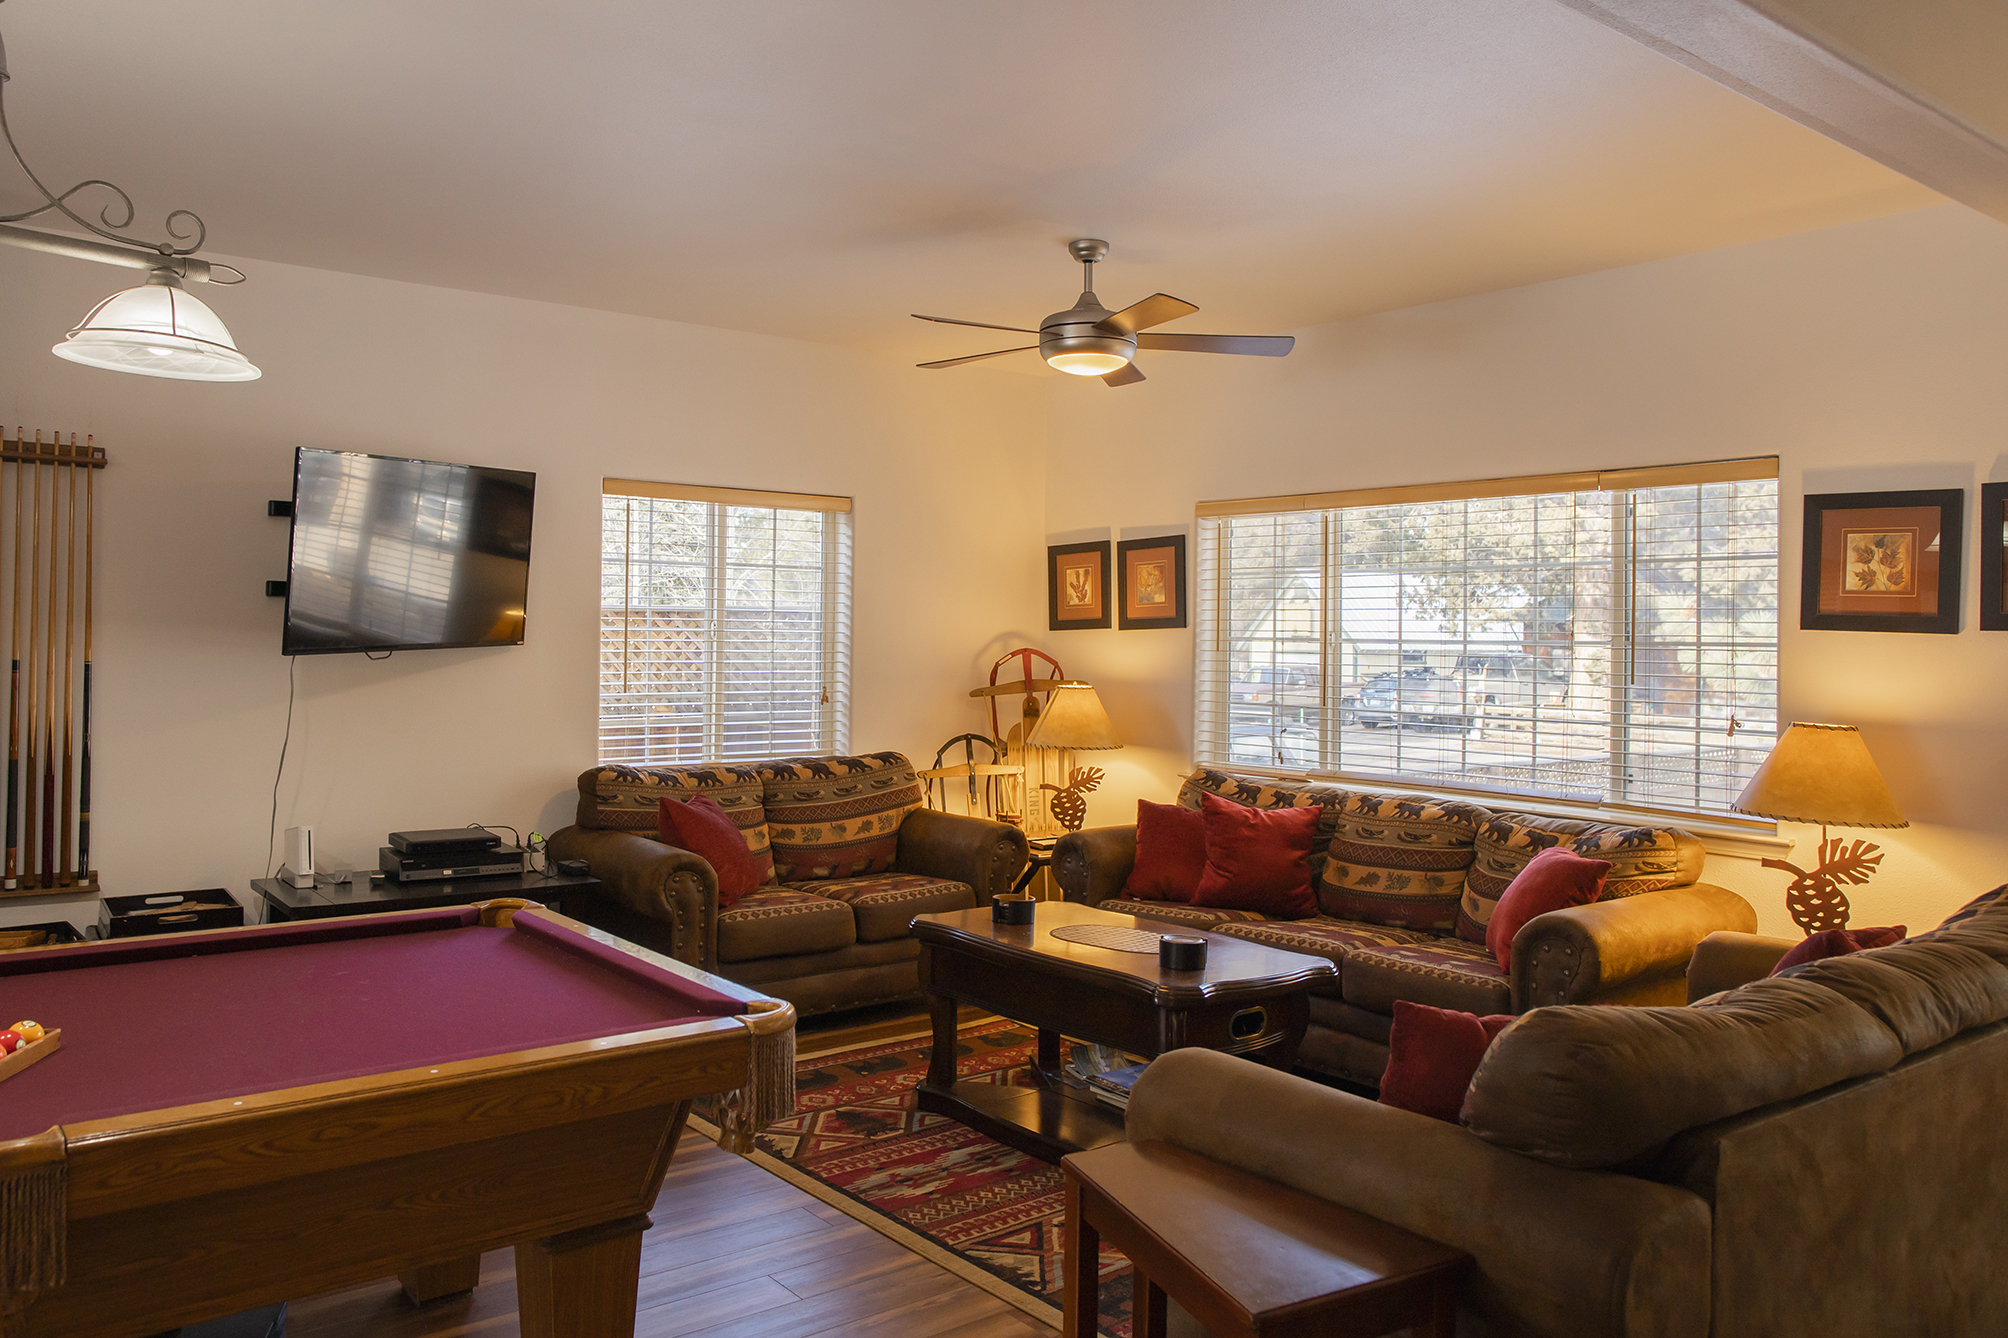 Living room with pool table